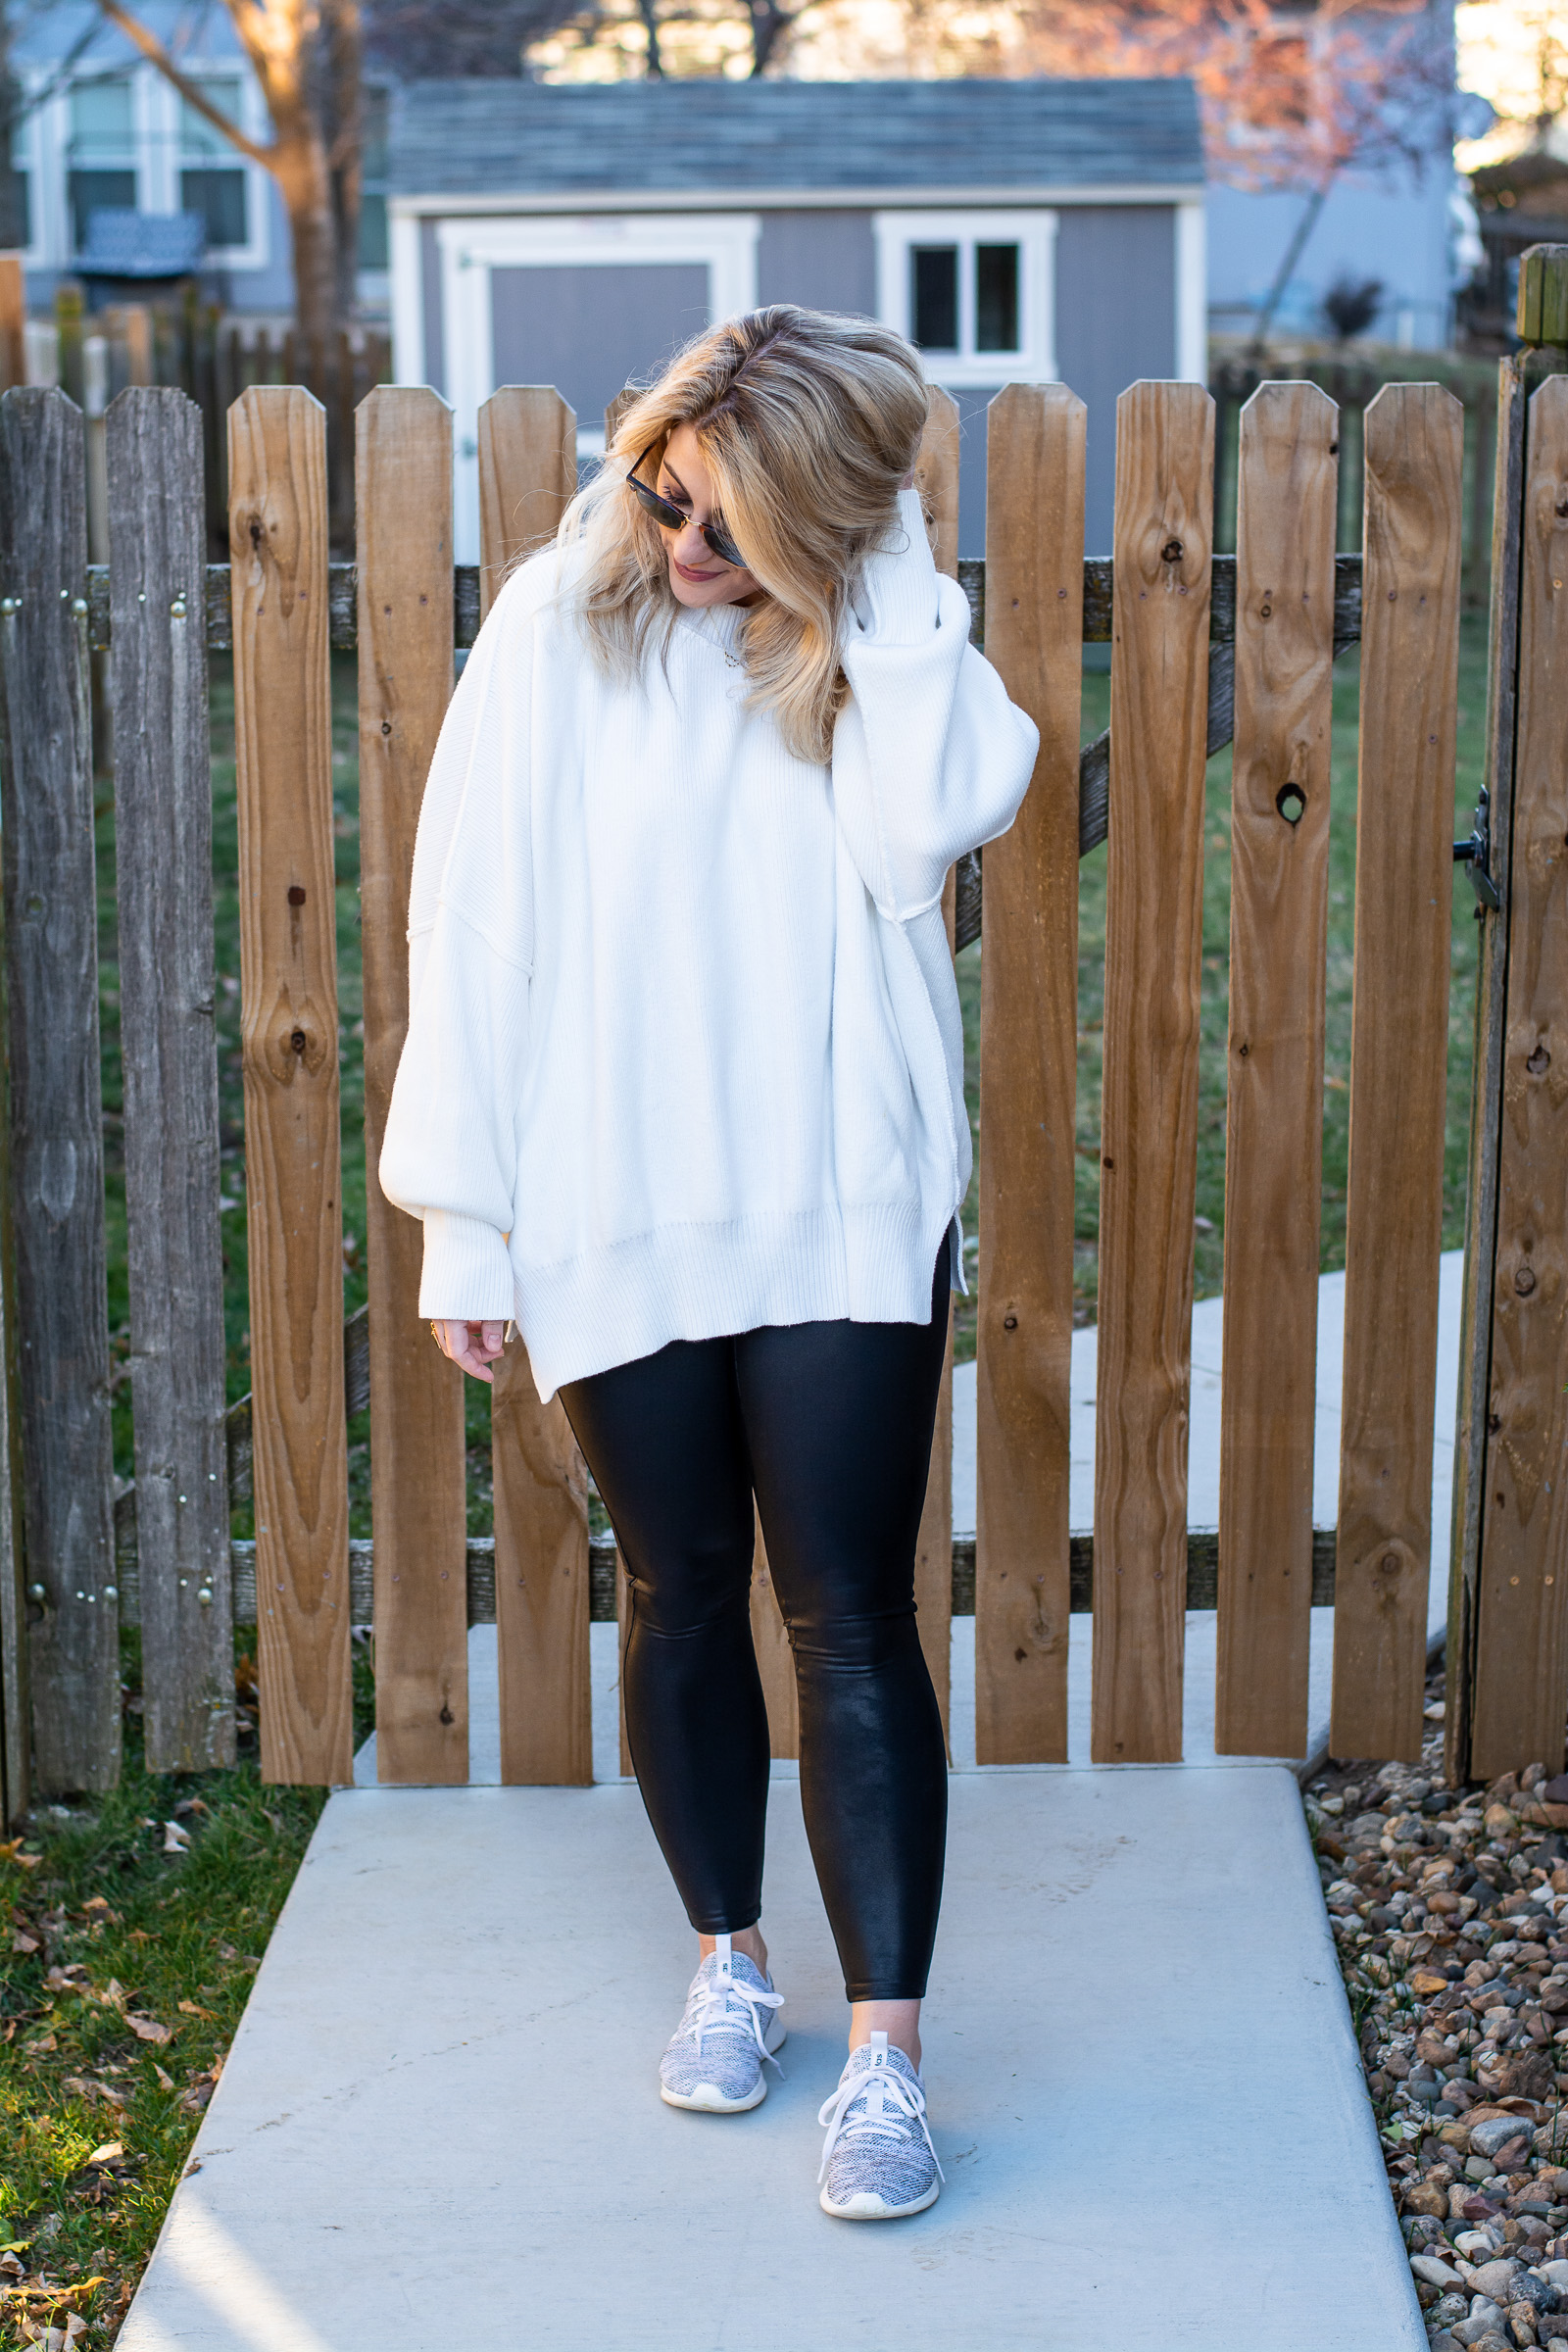 Chart The Stars Sweater | Free People